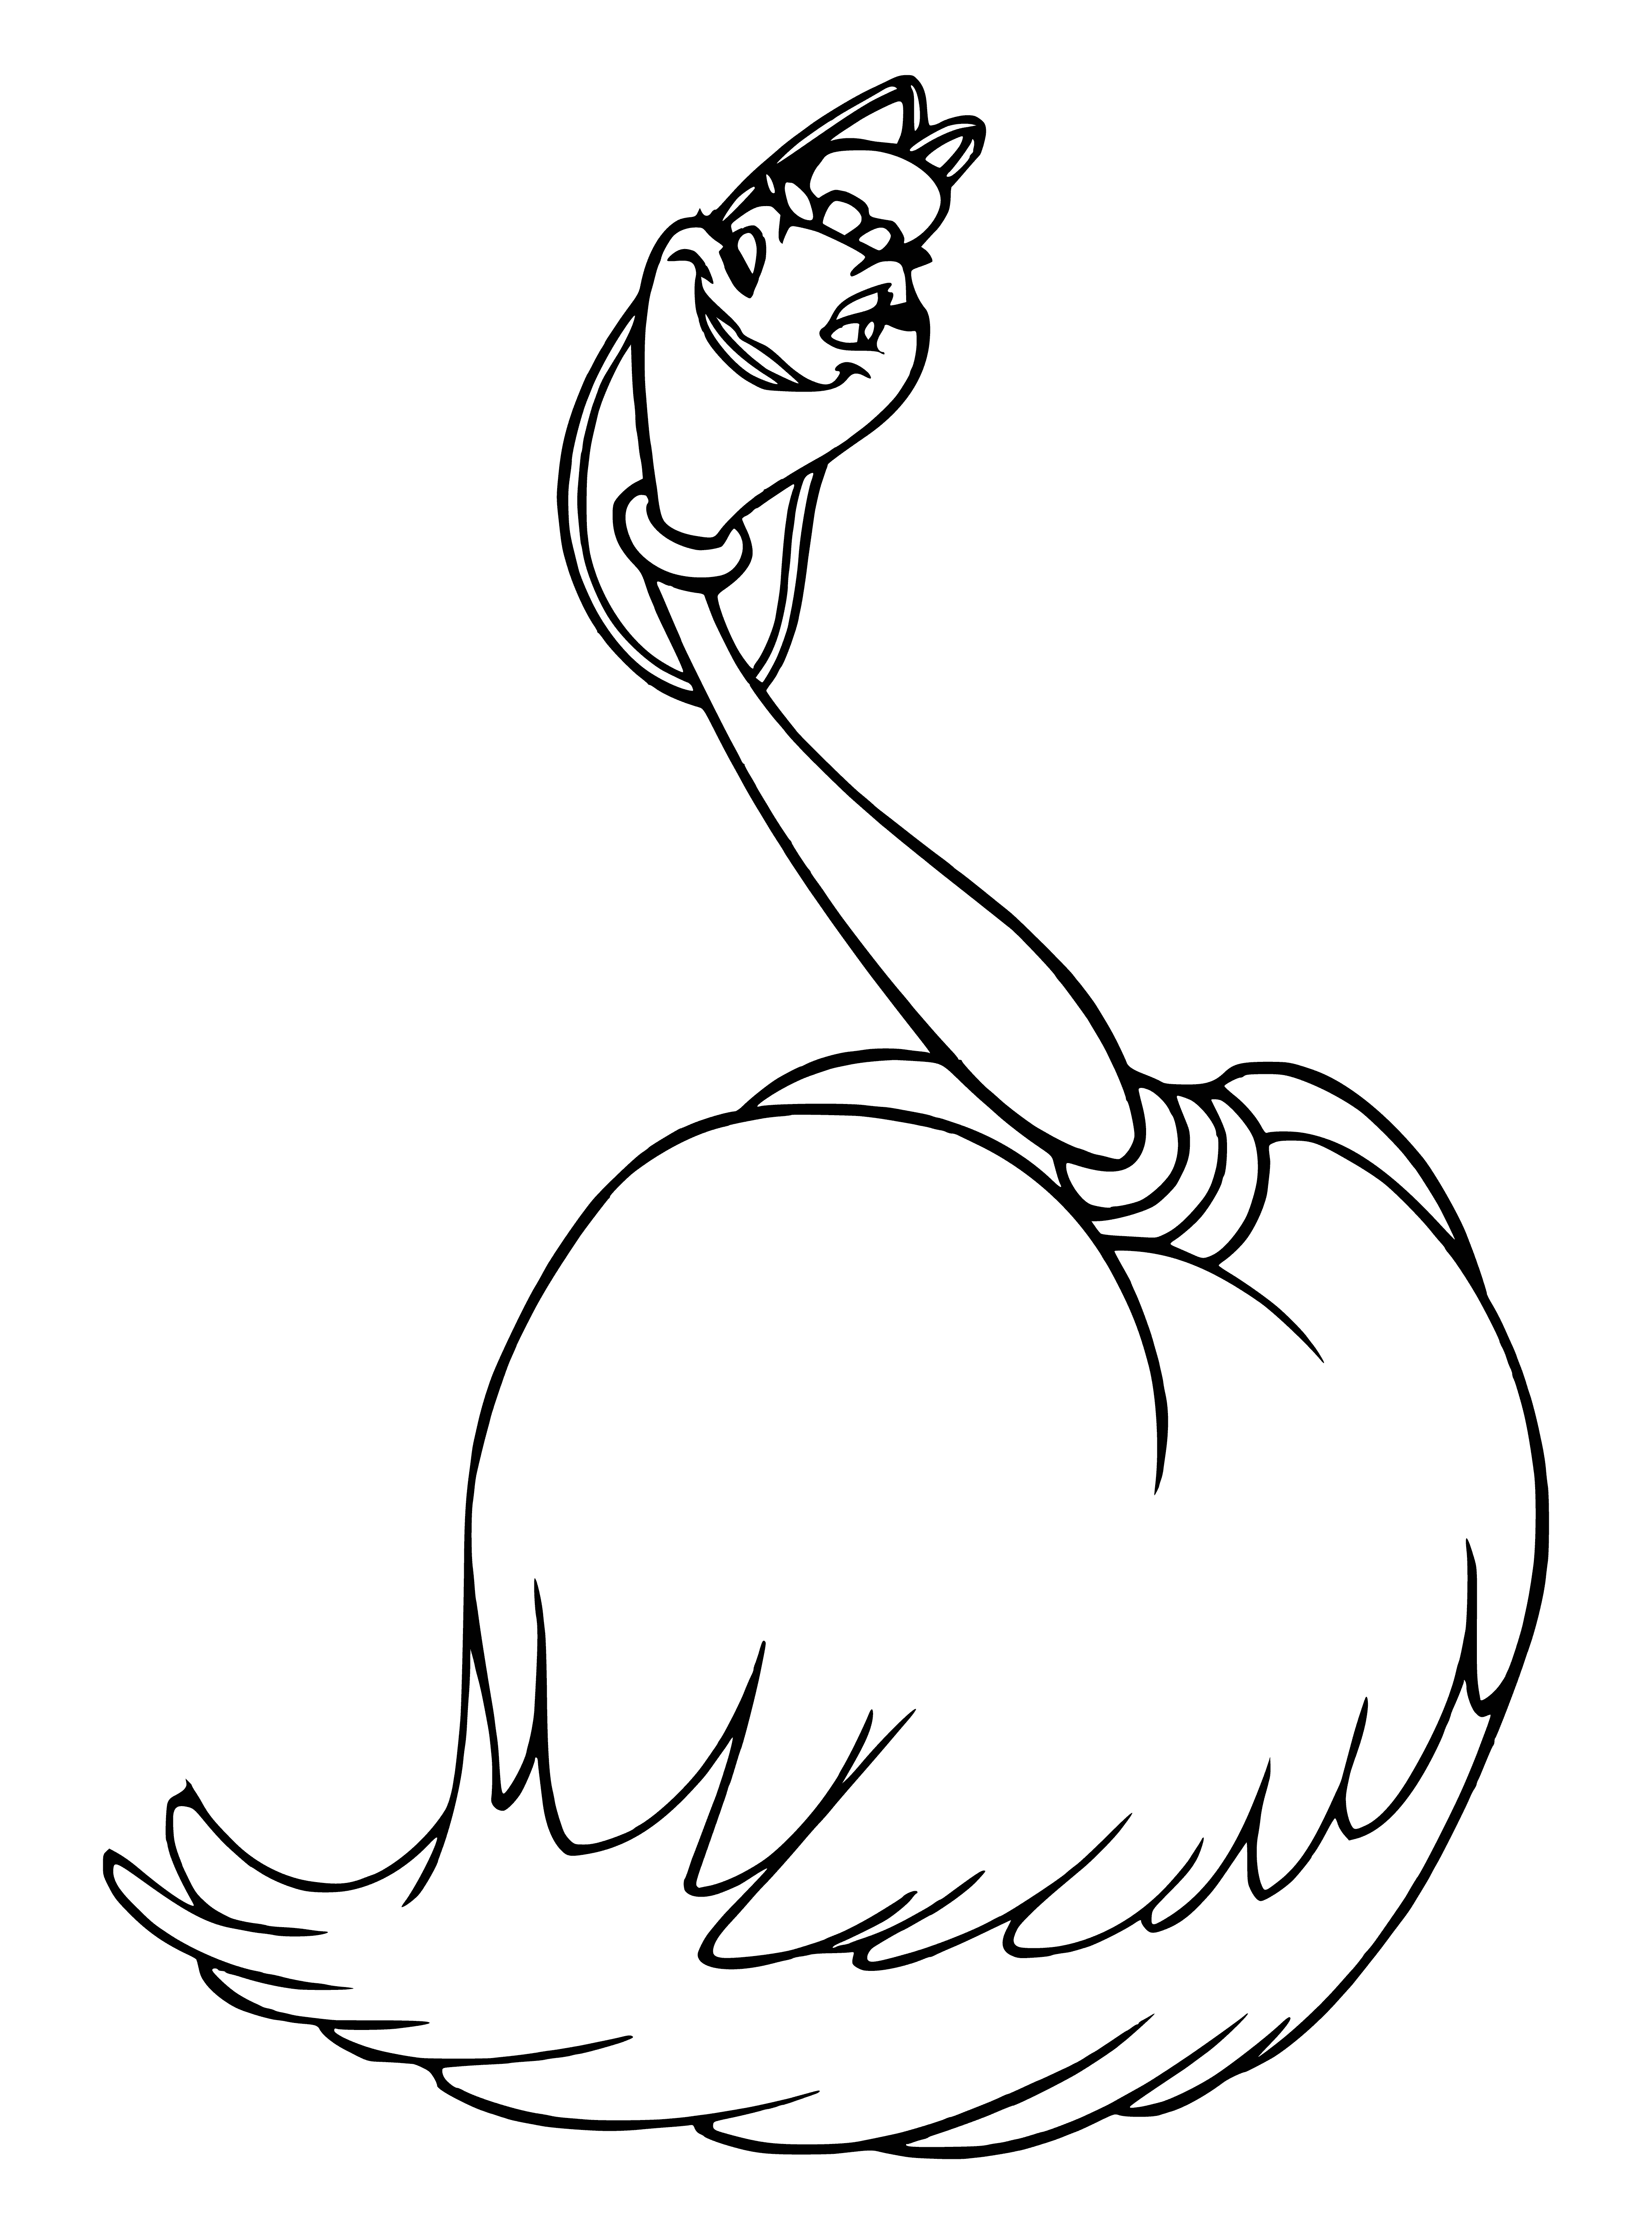 Maid Fifi coloring page